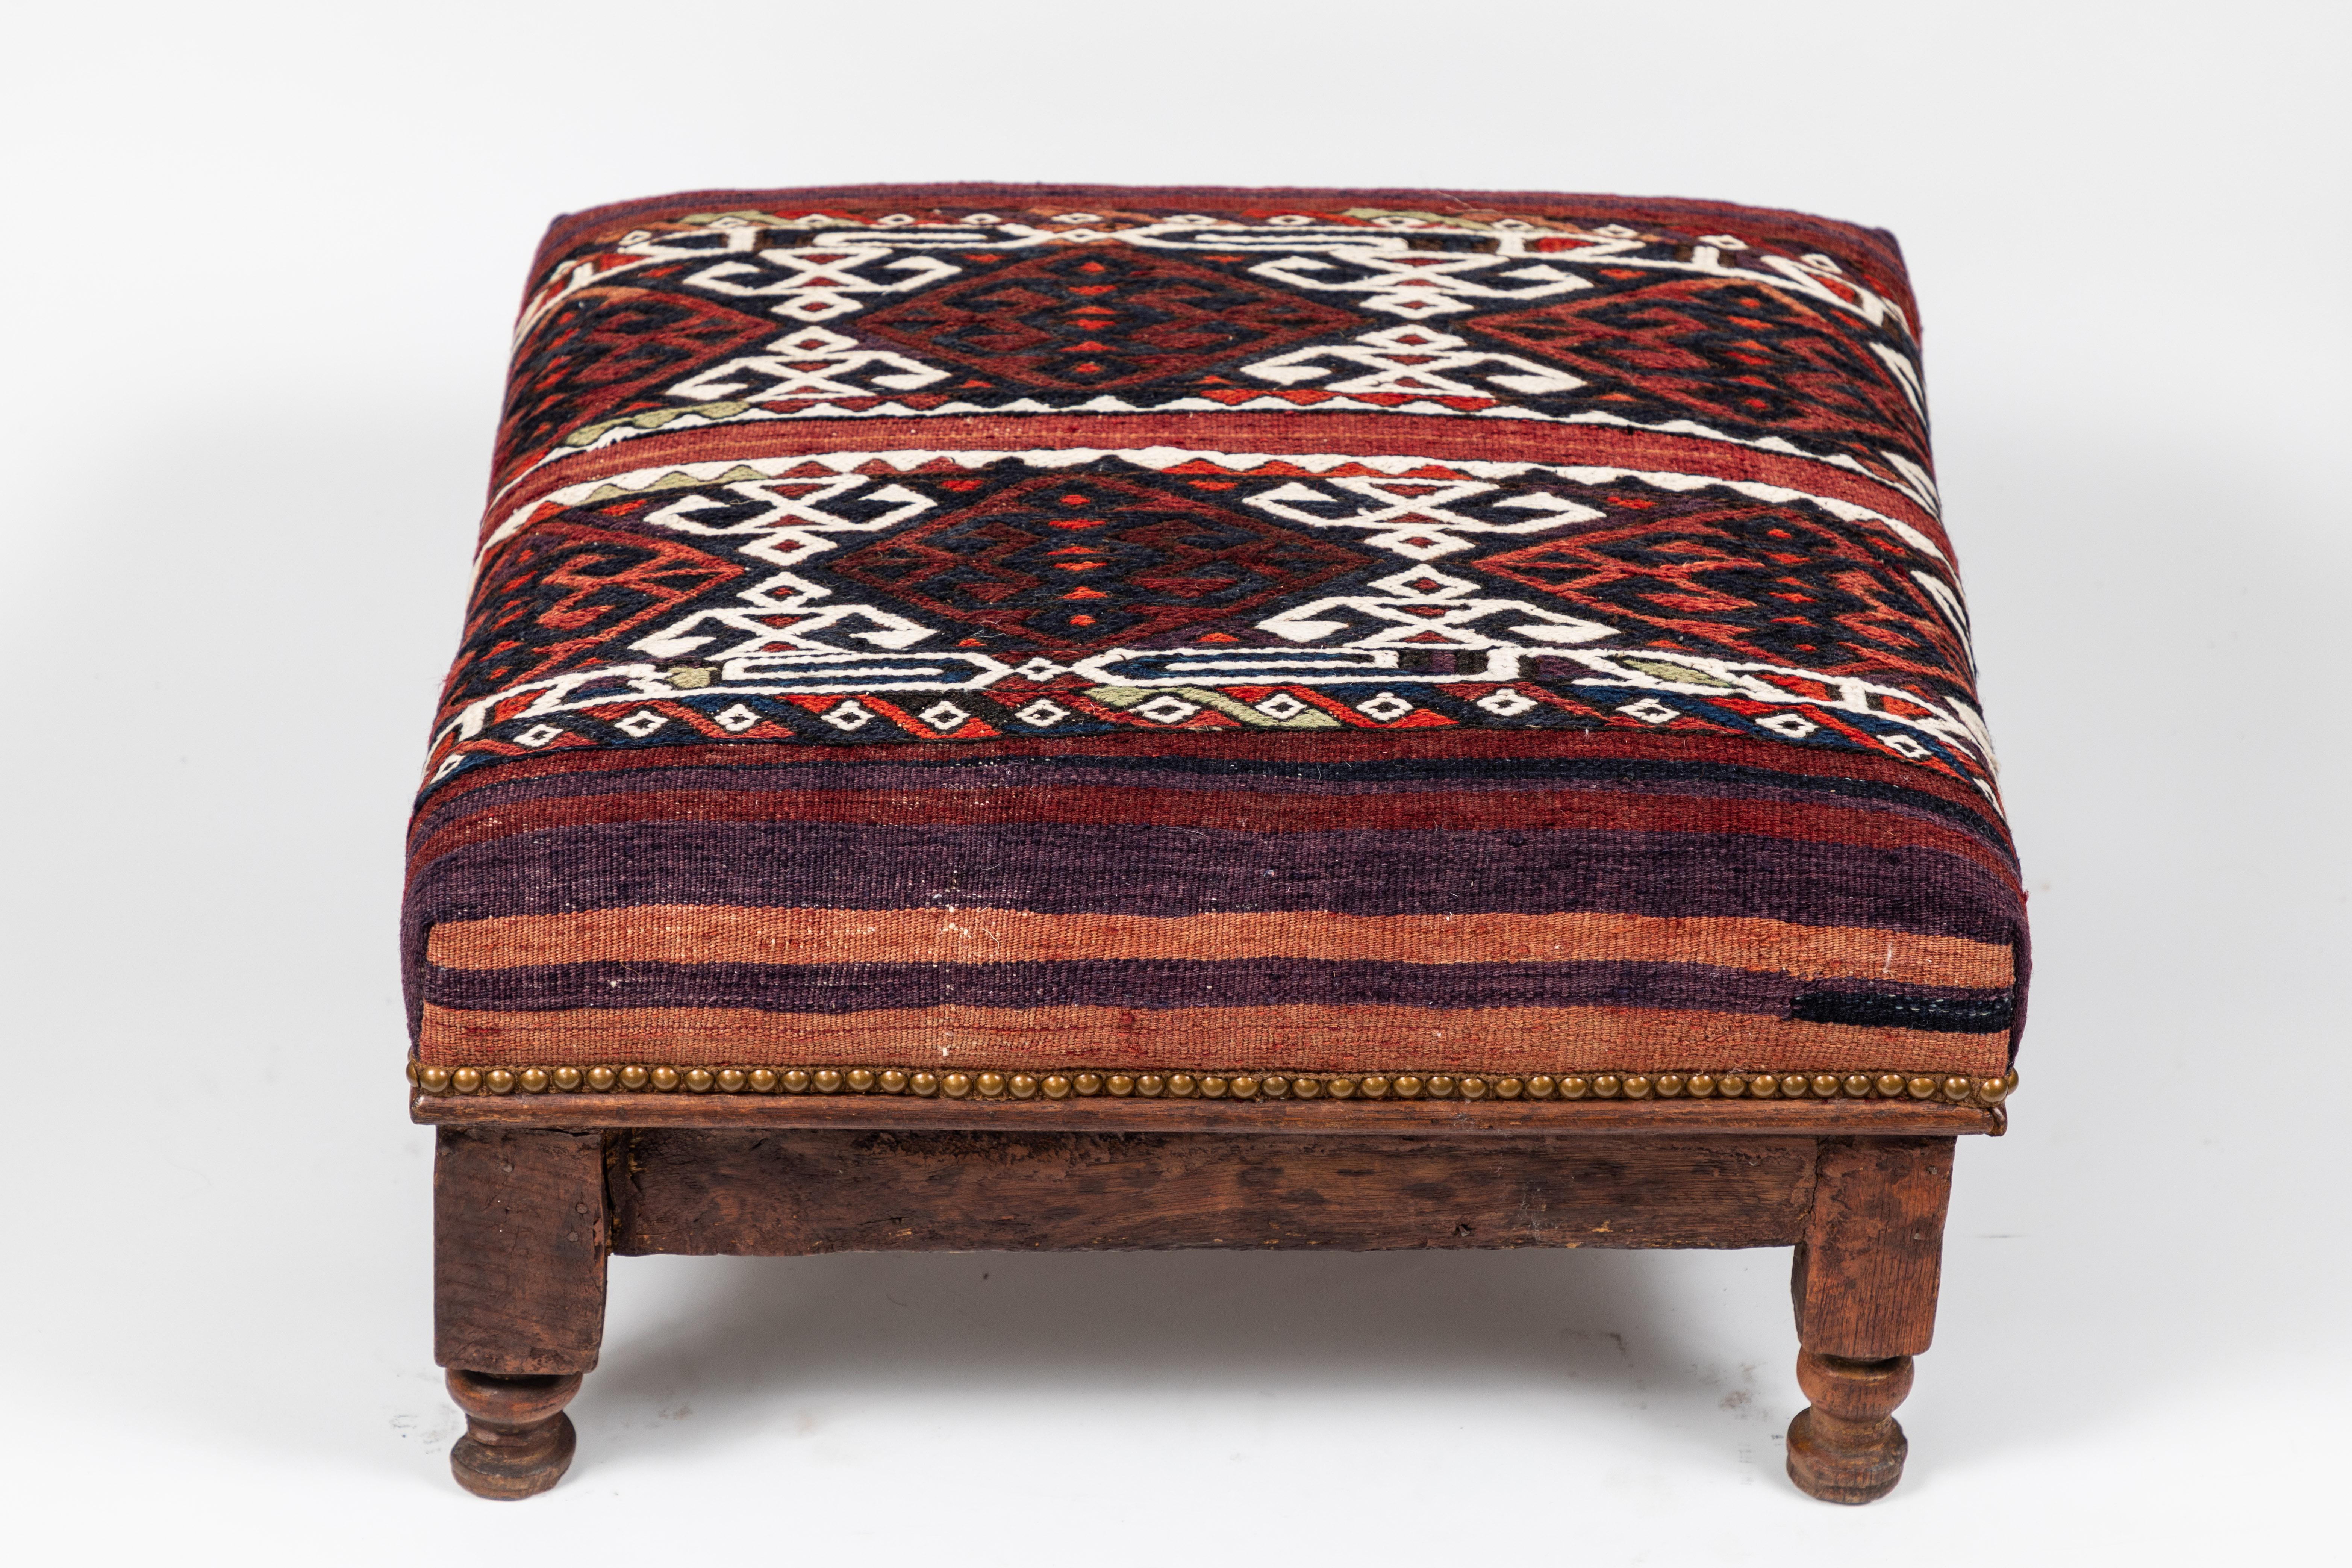 Fabulous squat vintage wood foot stool has been newly upholstered in a handsome vintage Turkish wool rug with dynamic pattern and a decorative nailhead trim detail.